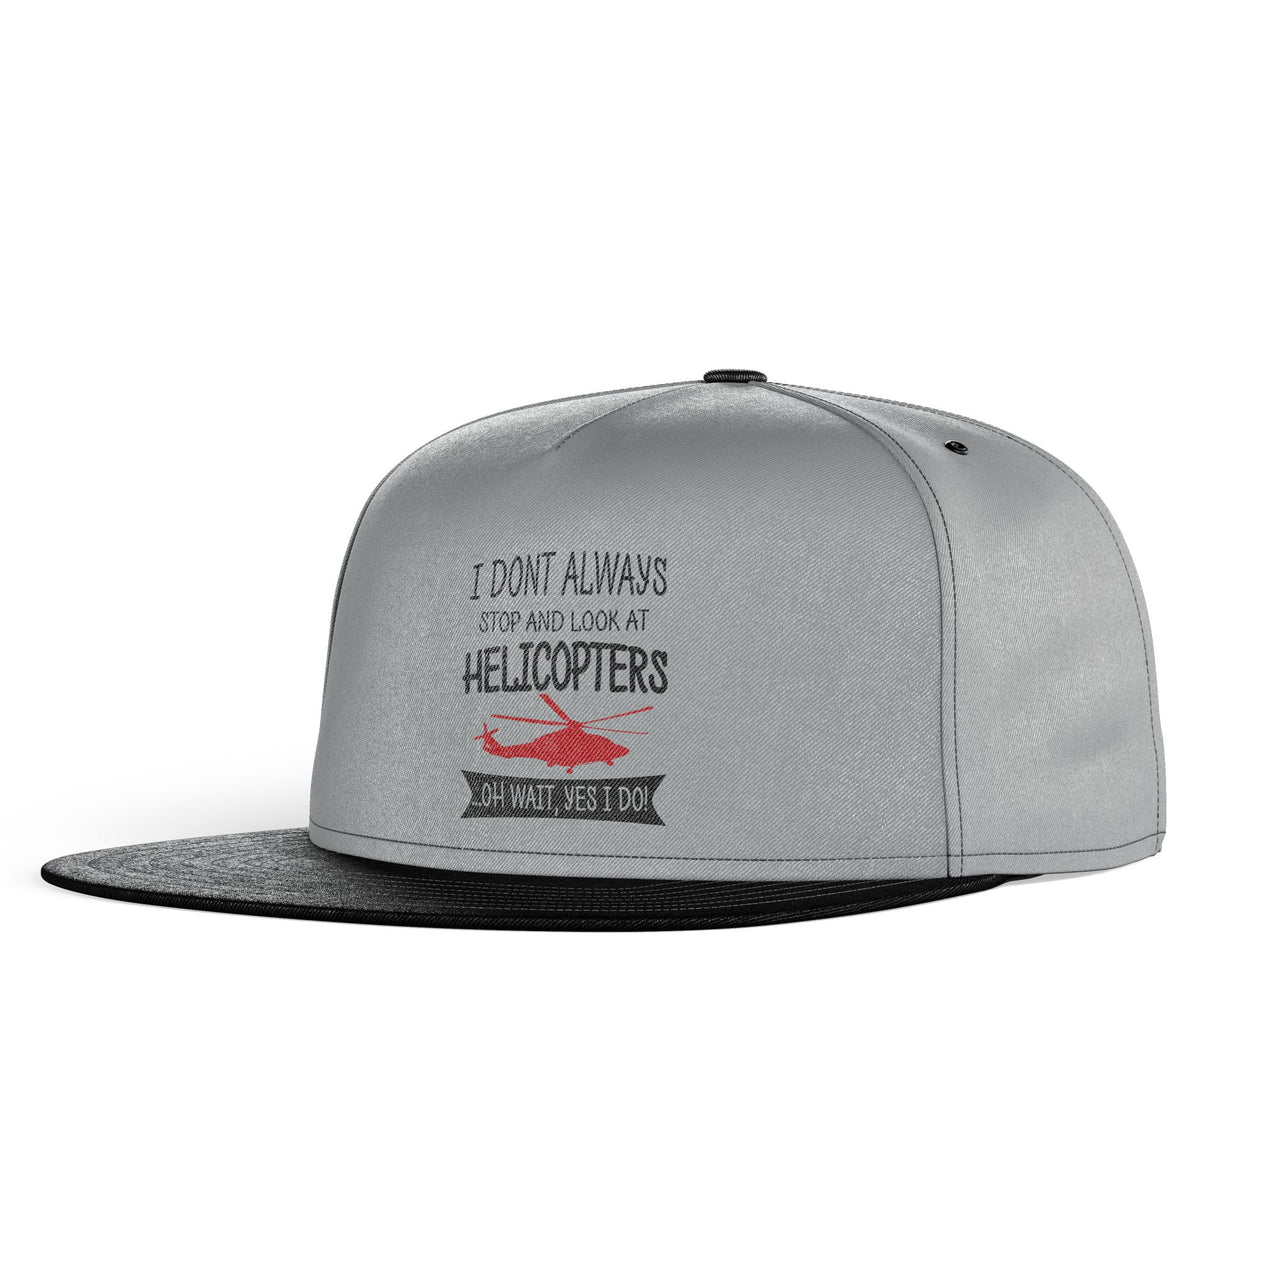 I Don't Always Stop and Look at Helicopters Designed Snapback Caps & Hats